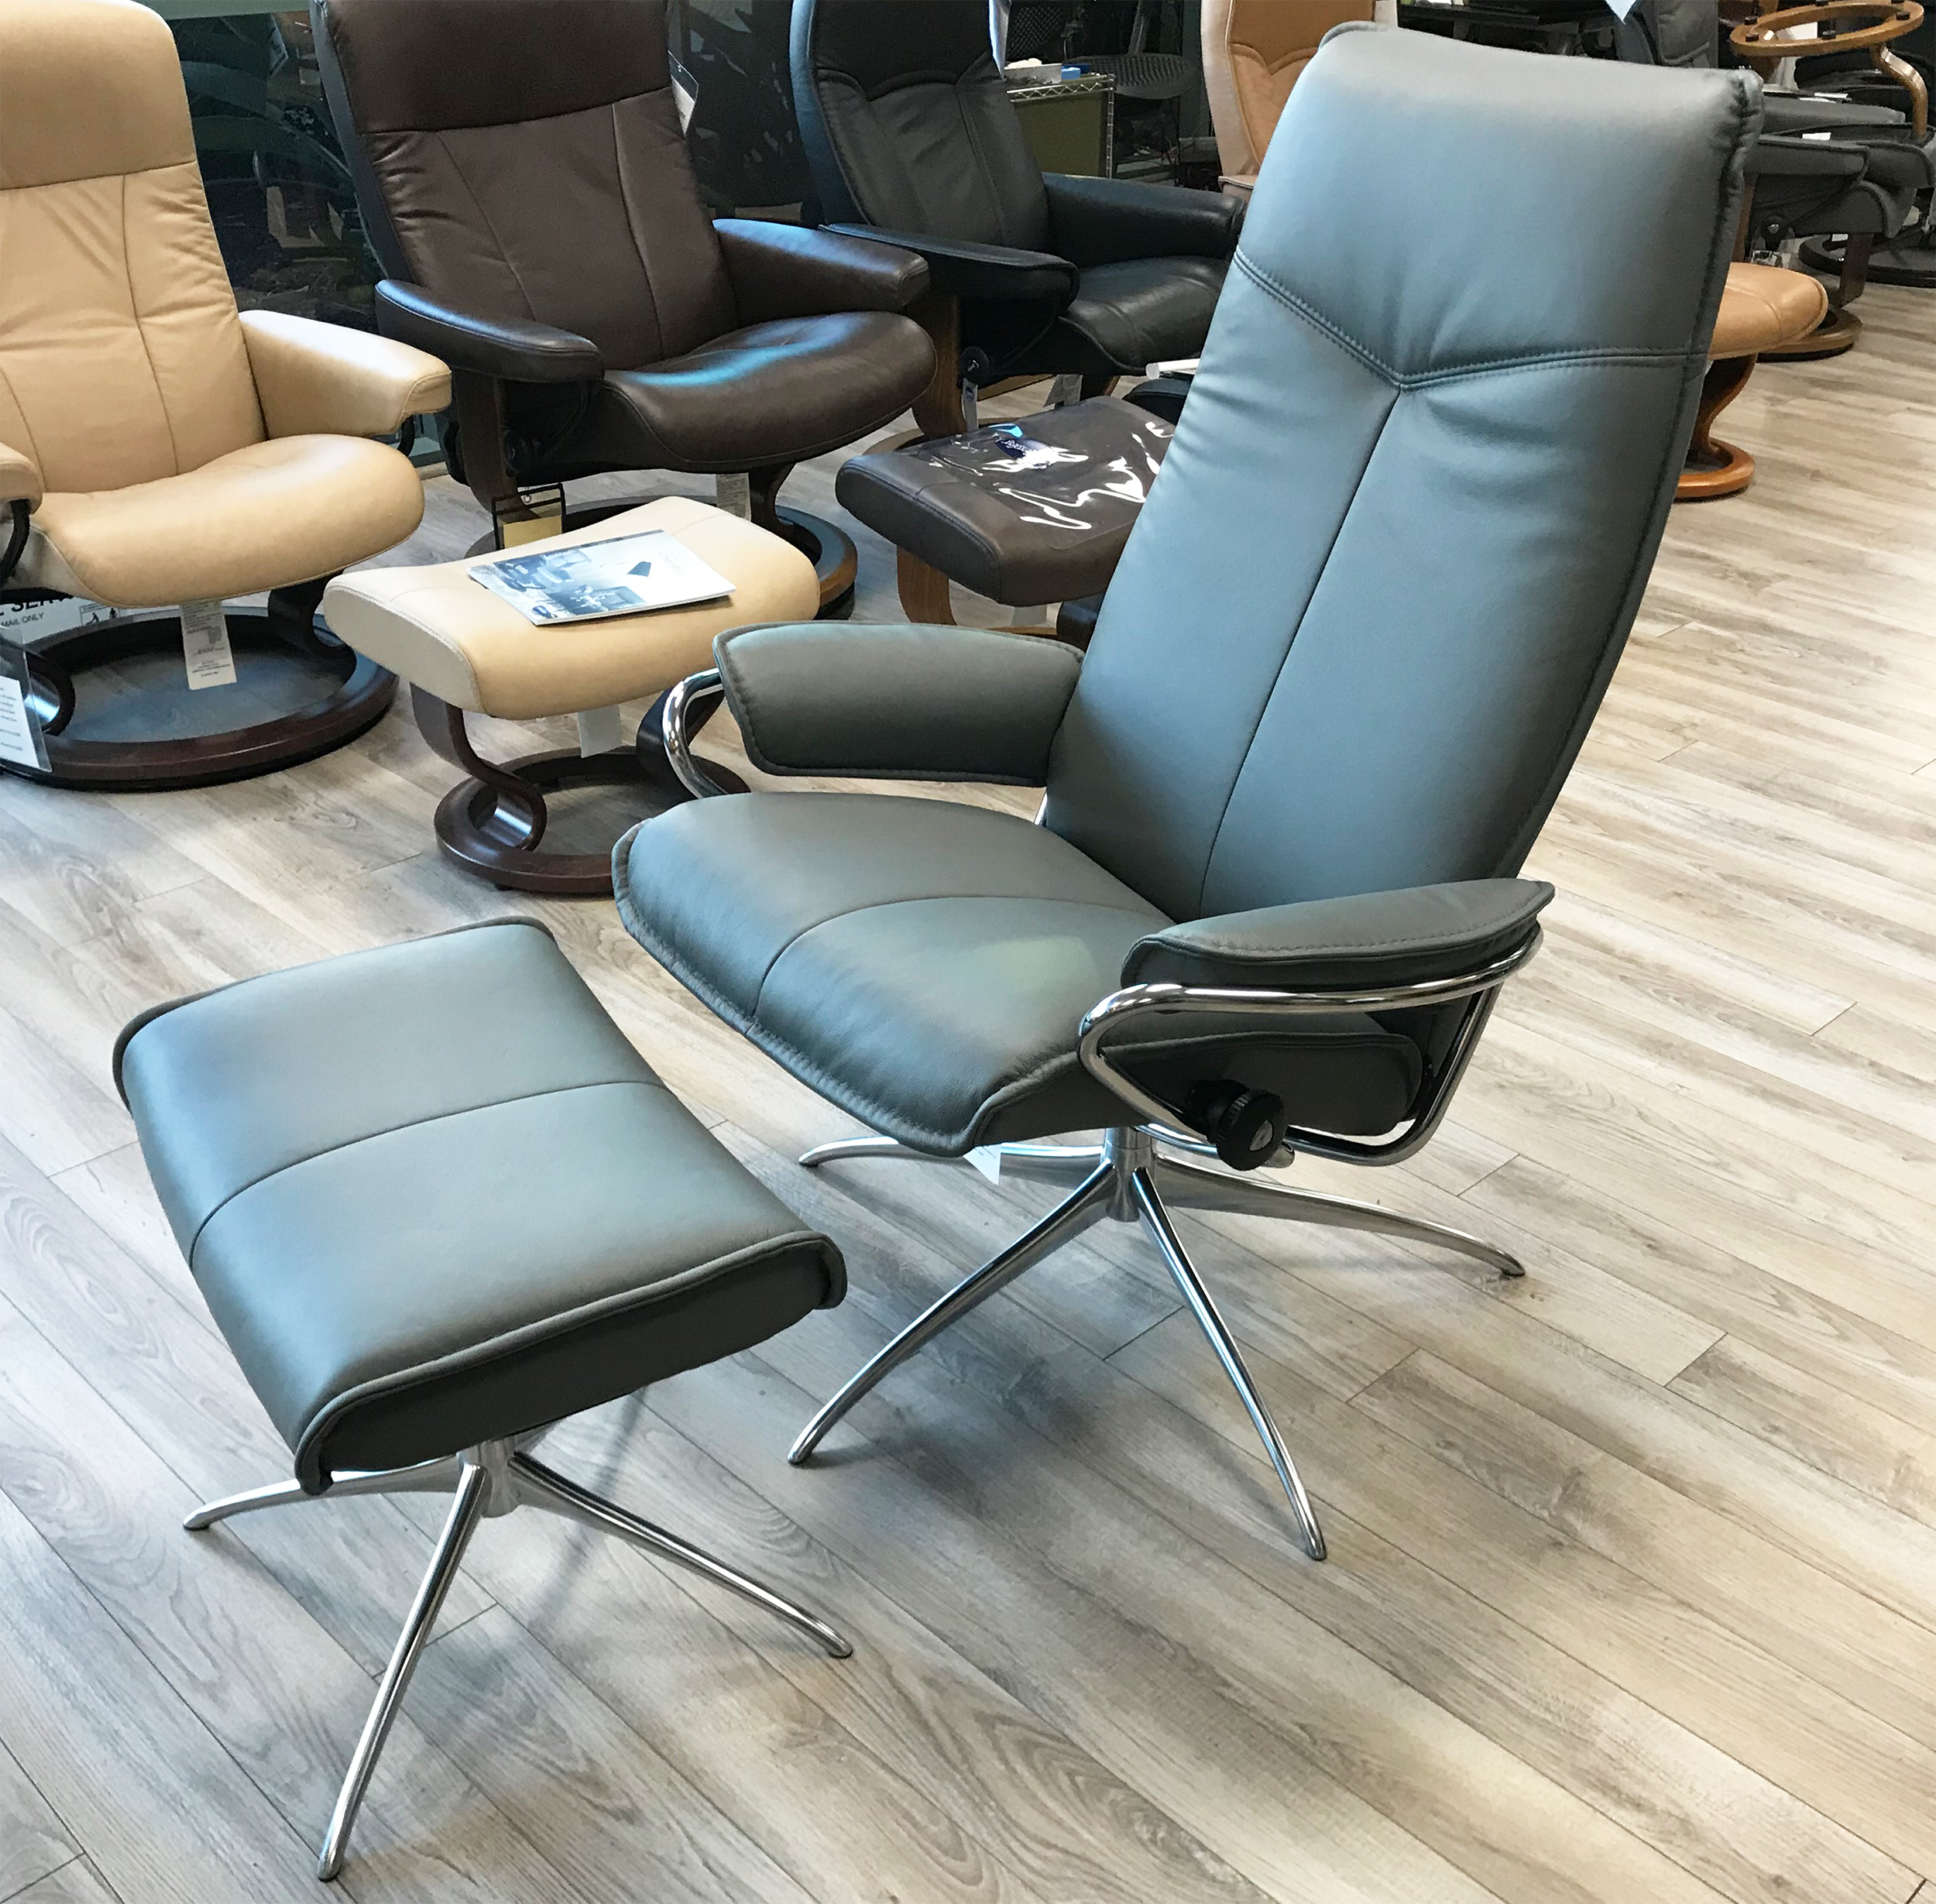 Stressless City High Back Batick Chairs Batick City - Leather Ekornes Leather Grey Grey by High Stressless Back Recliners